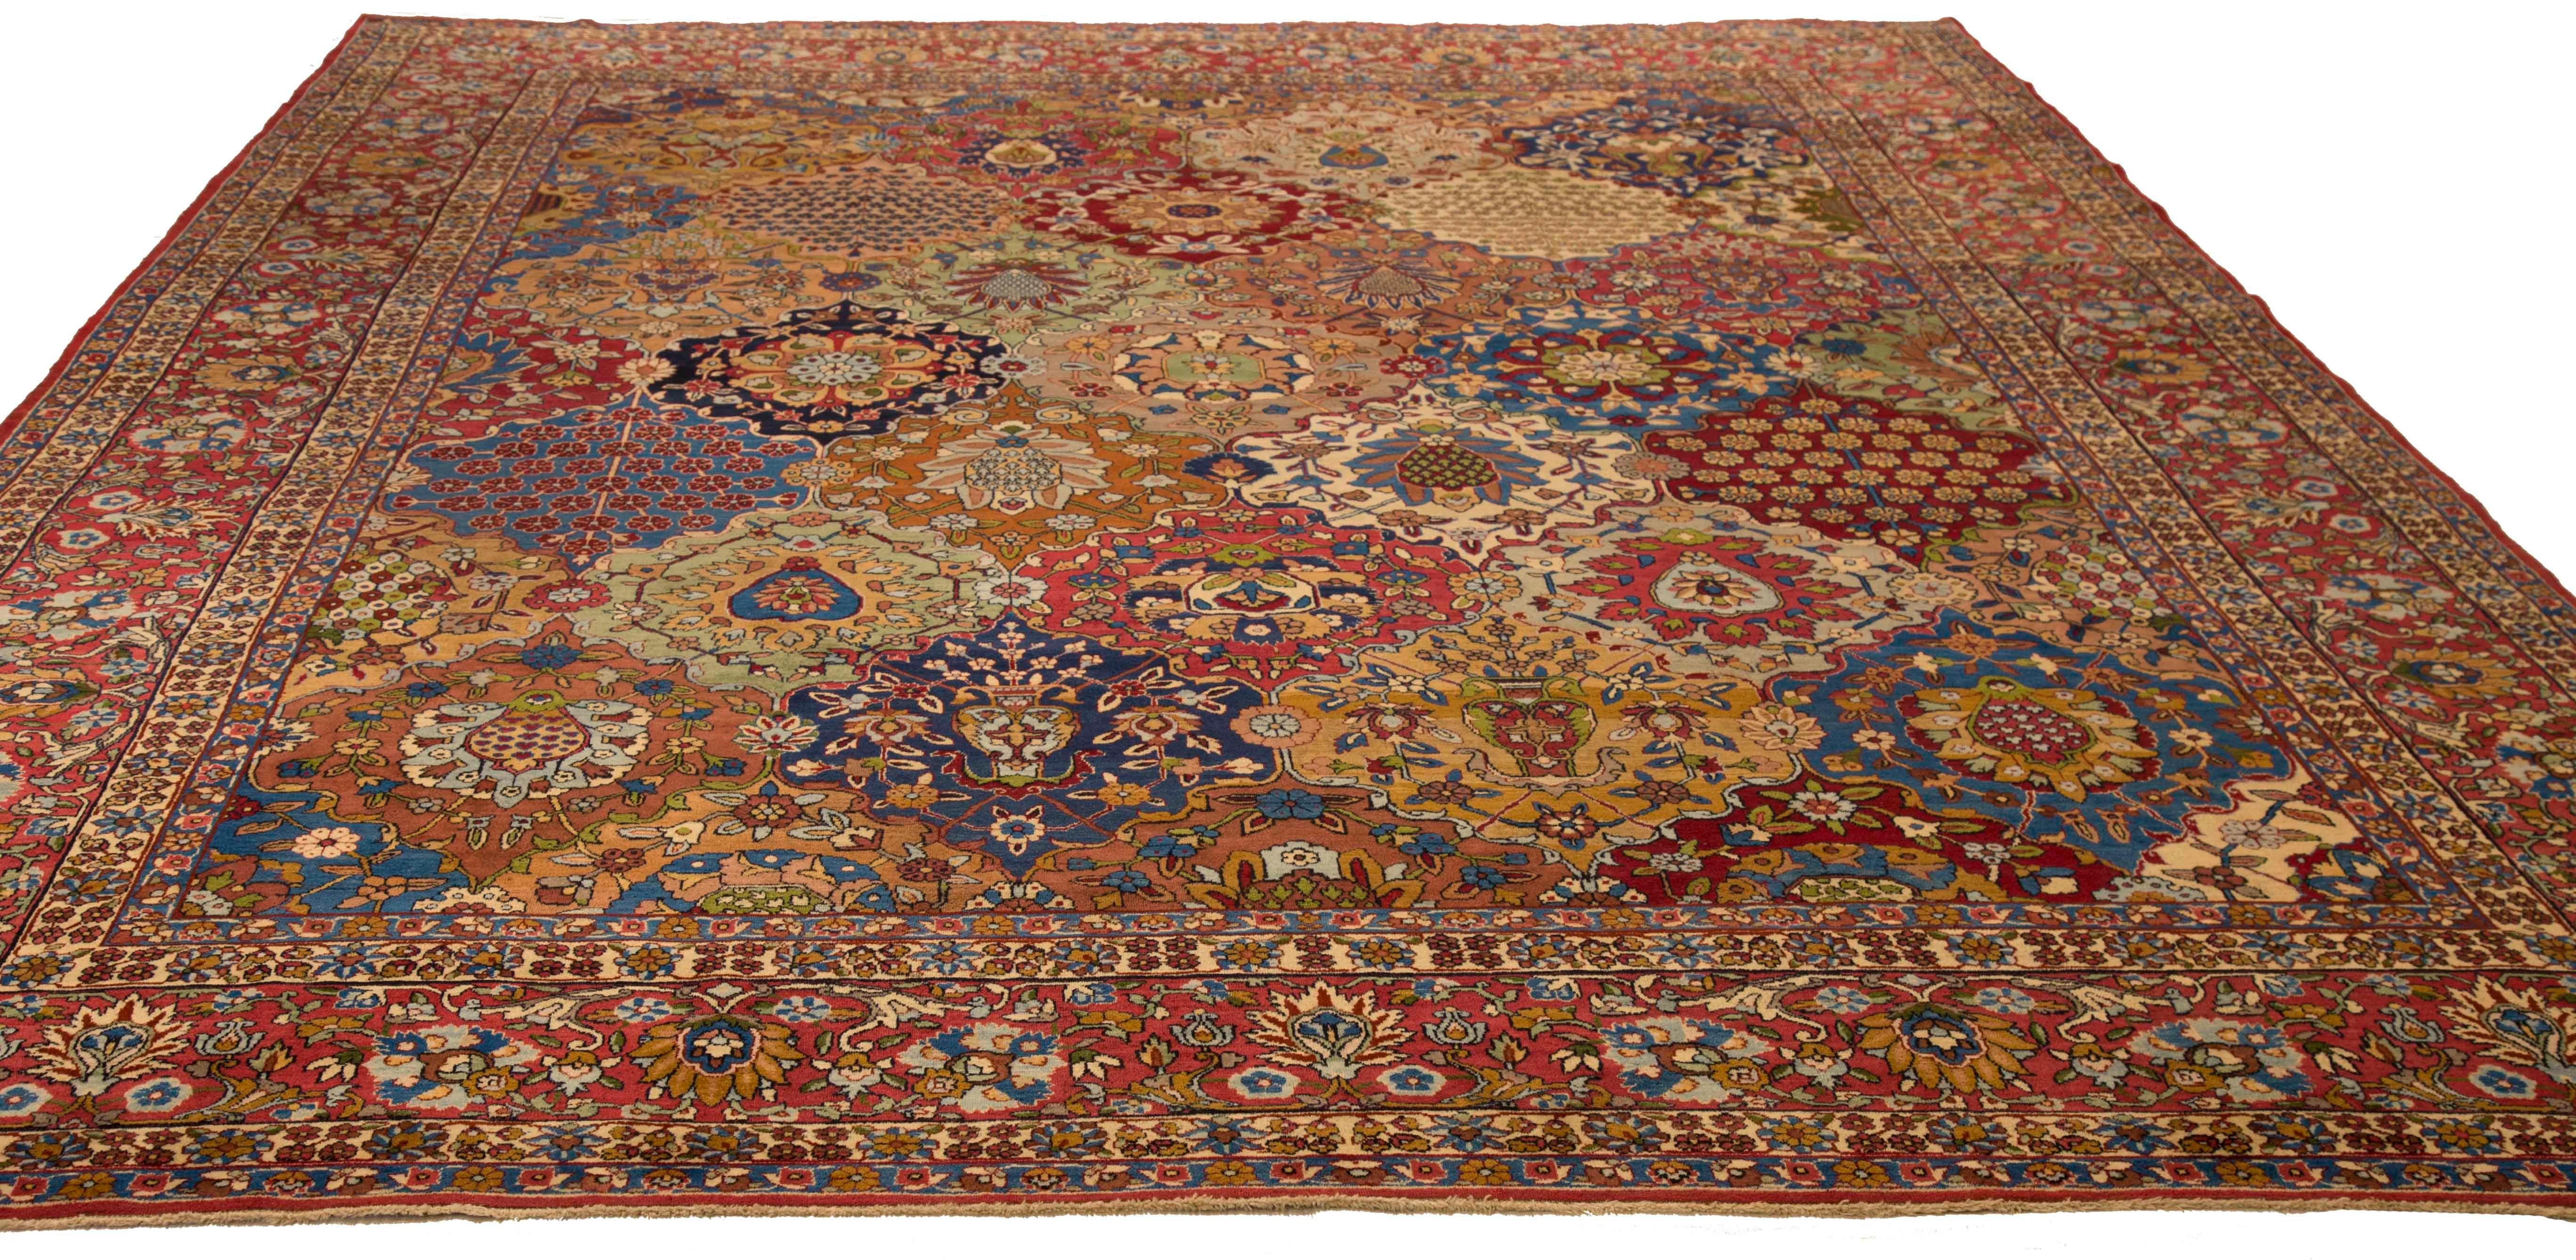 Antique Persian Yazd Rug with a Field of Flower Bouquets Design, circa 1920s In Excellent Condition For Sale In Dallas, TX